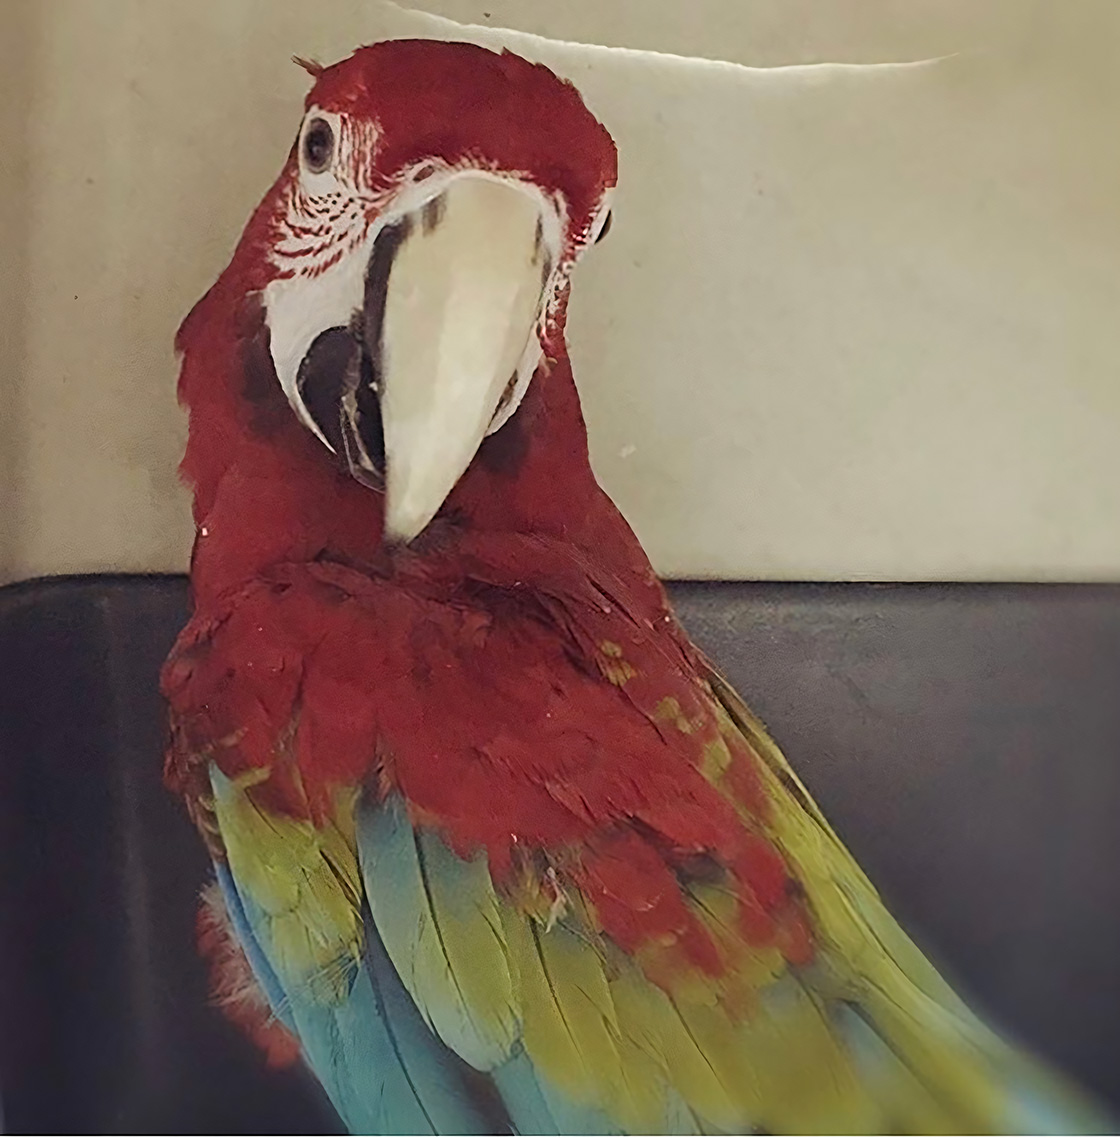 Profile view of a red macaw parrot with vivid feathers, perched inside a clinic.